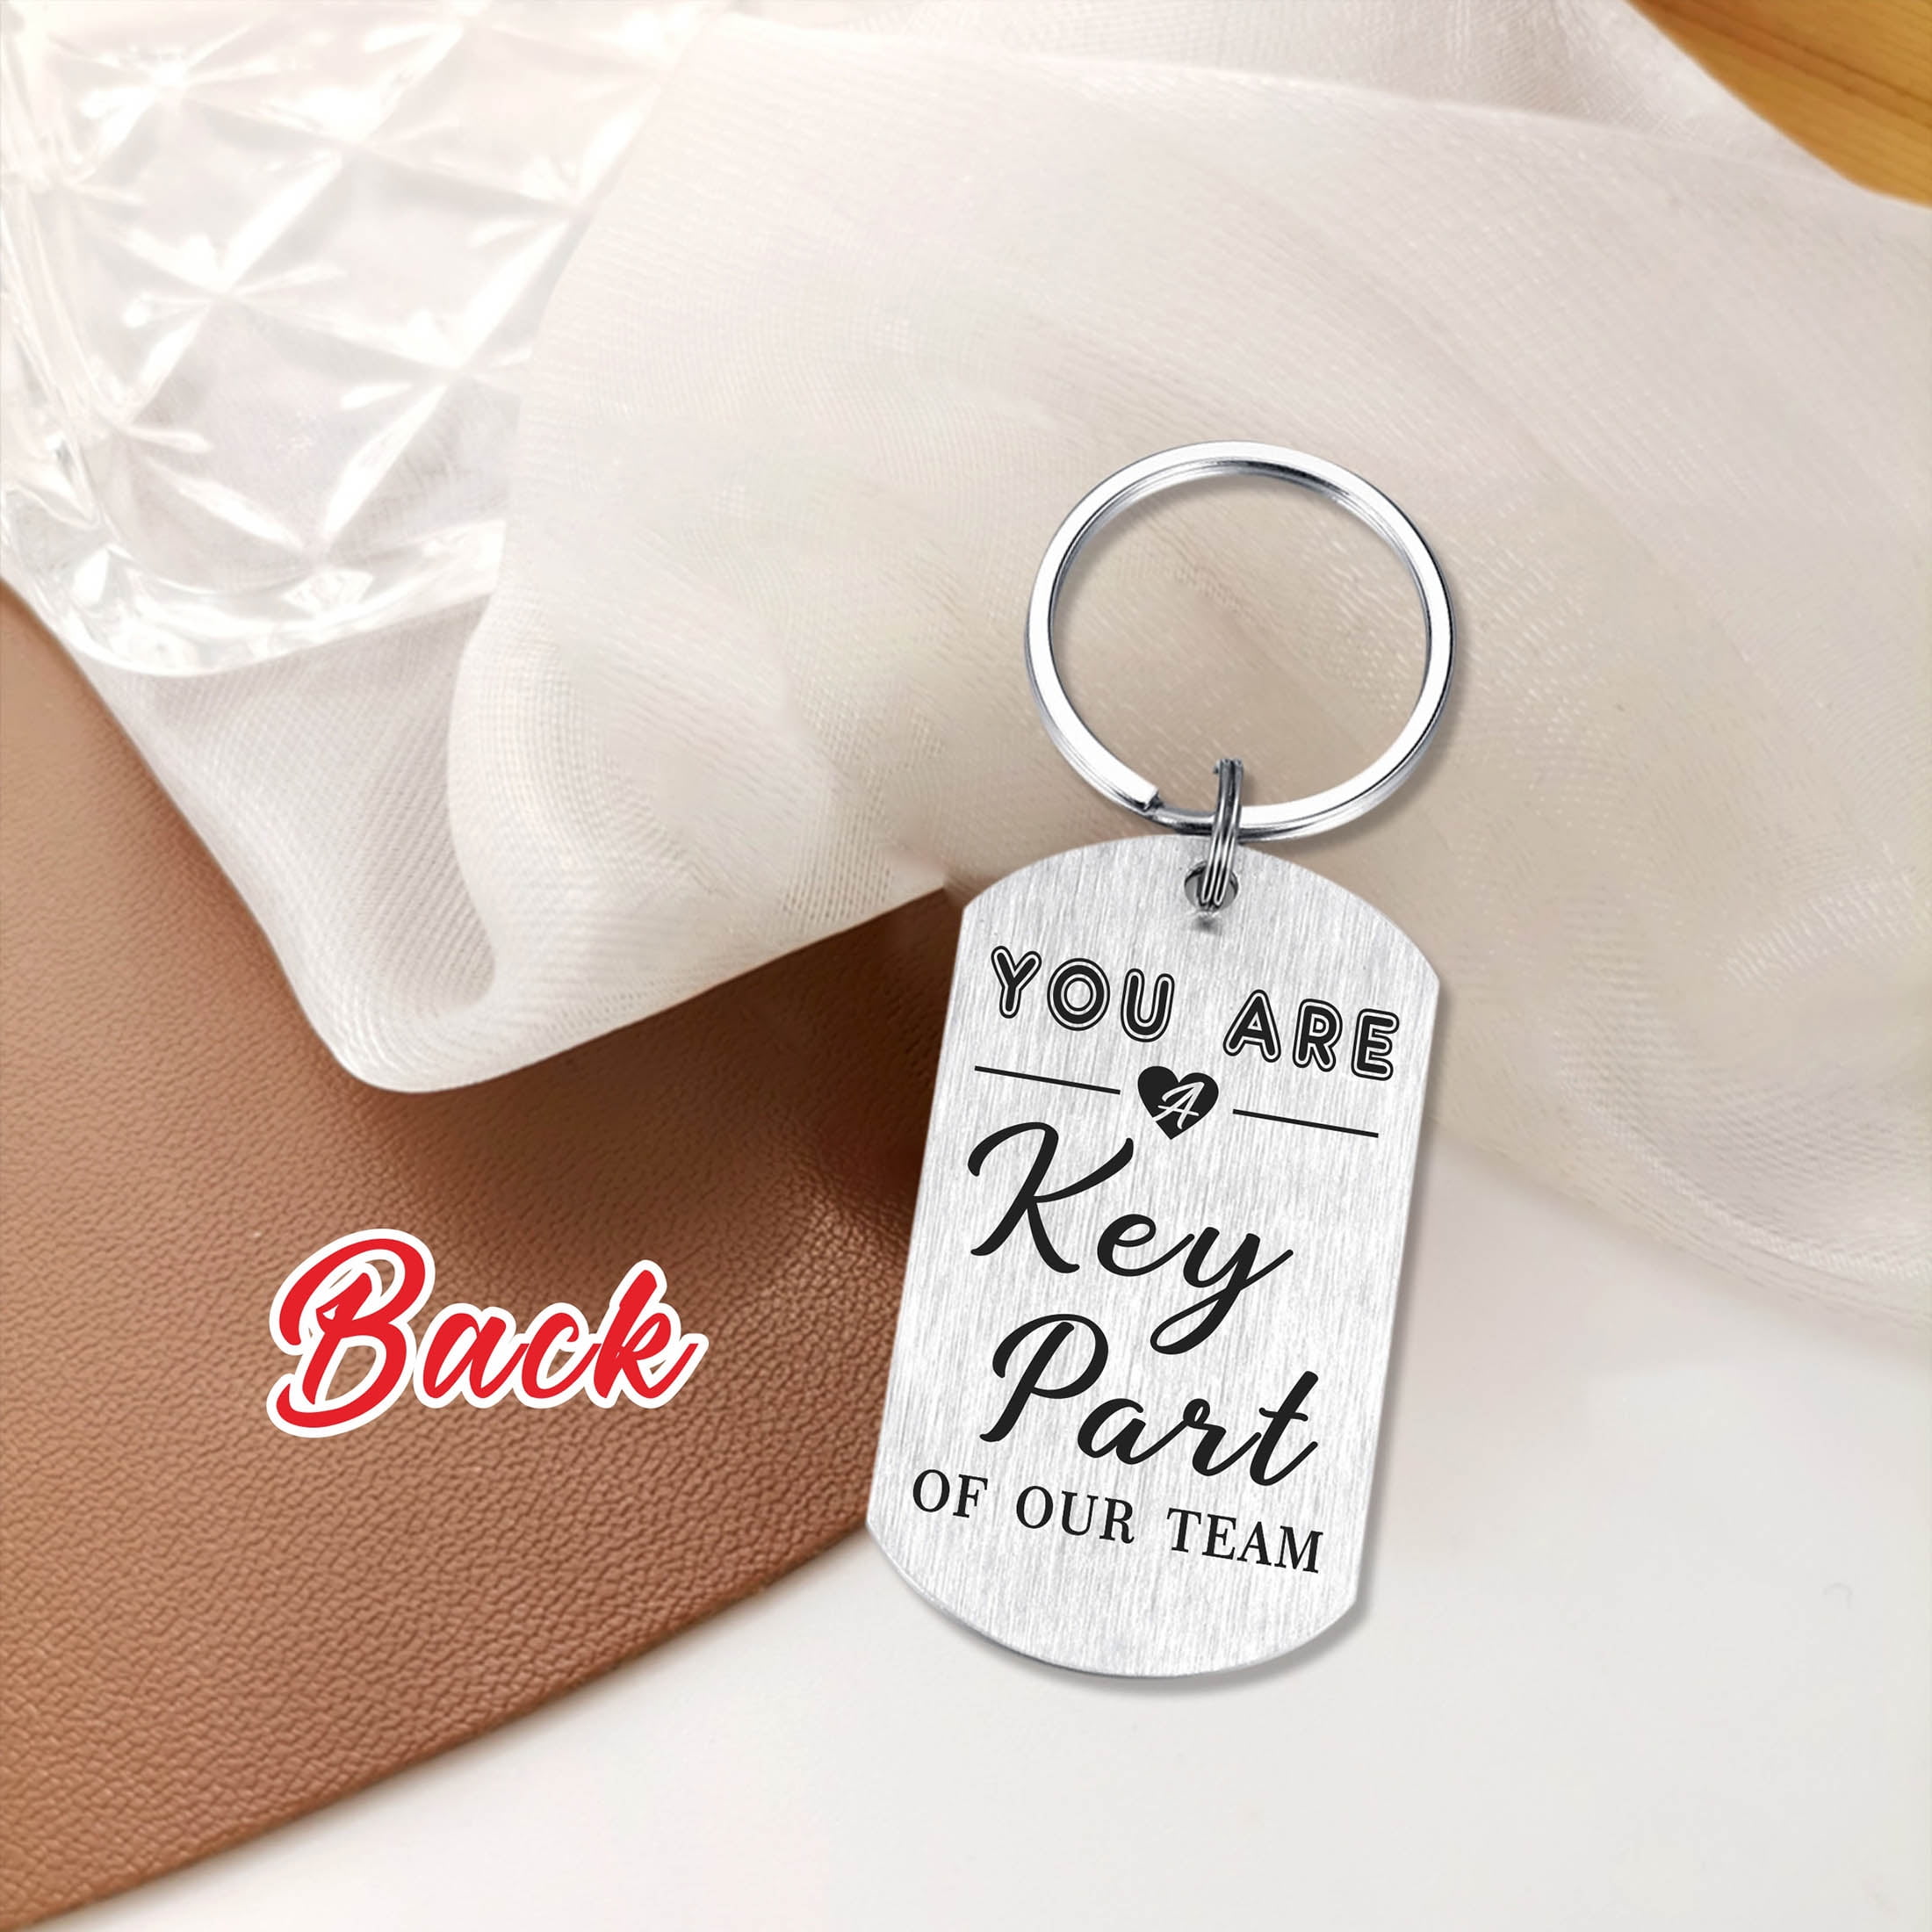 Corporate Gift - Keychain - WL1226 - WL1226 at Rs 50.15 | Gifts for all  occasions by Wedtree